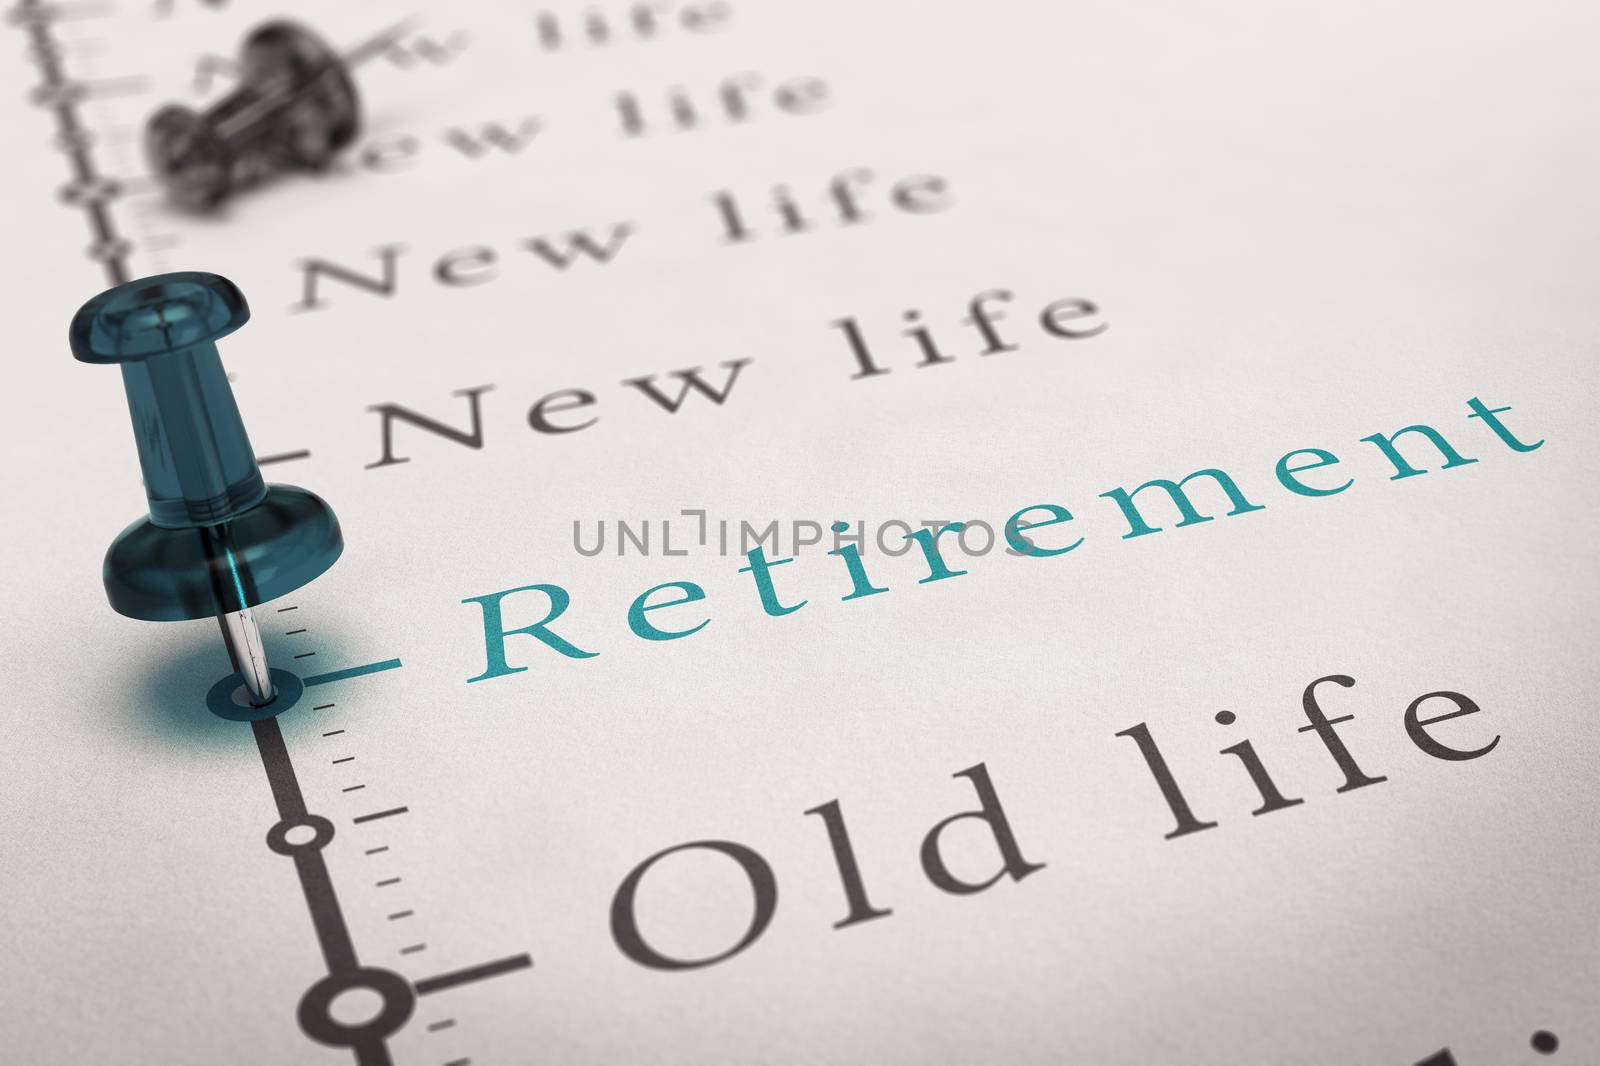 Retirement written on a timeline printed on a paper with a blue pushpin, concept image for changes after work life.